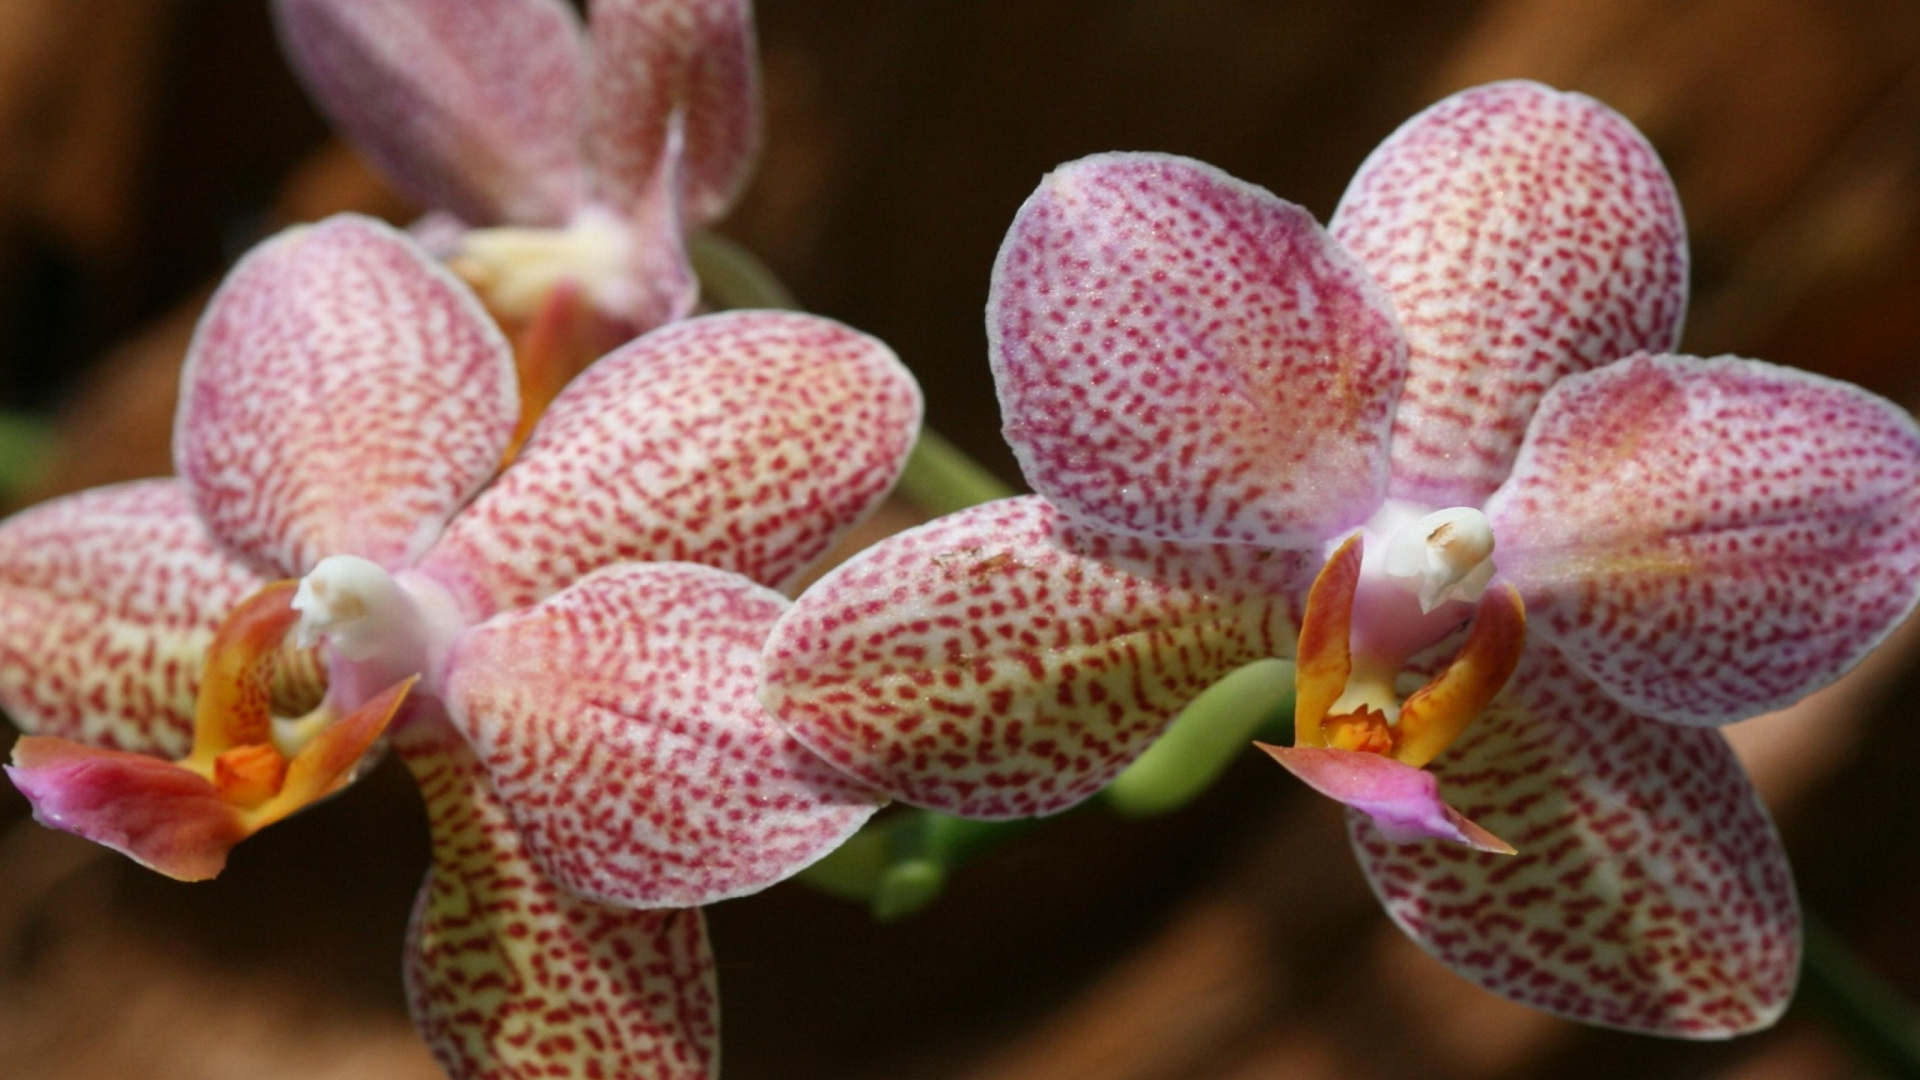 Amazing Orchids wallpaper 1920x1080